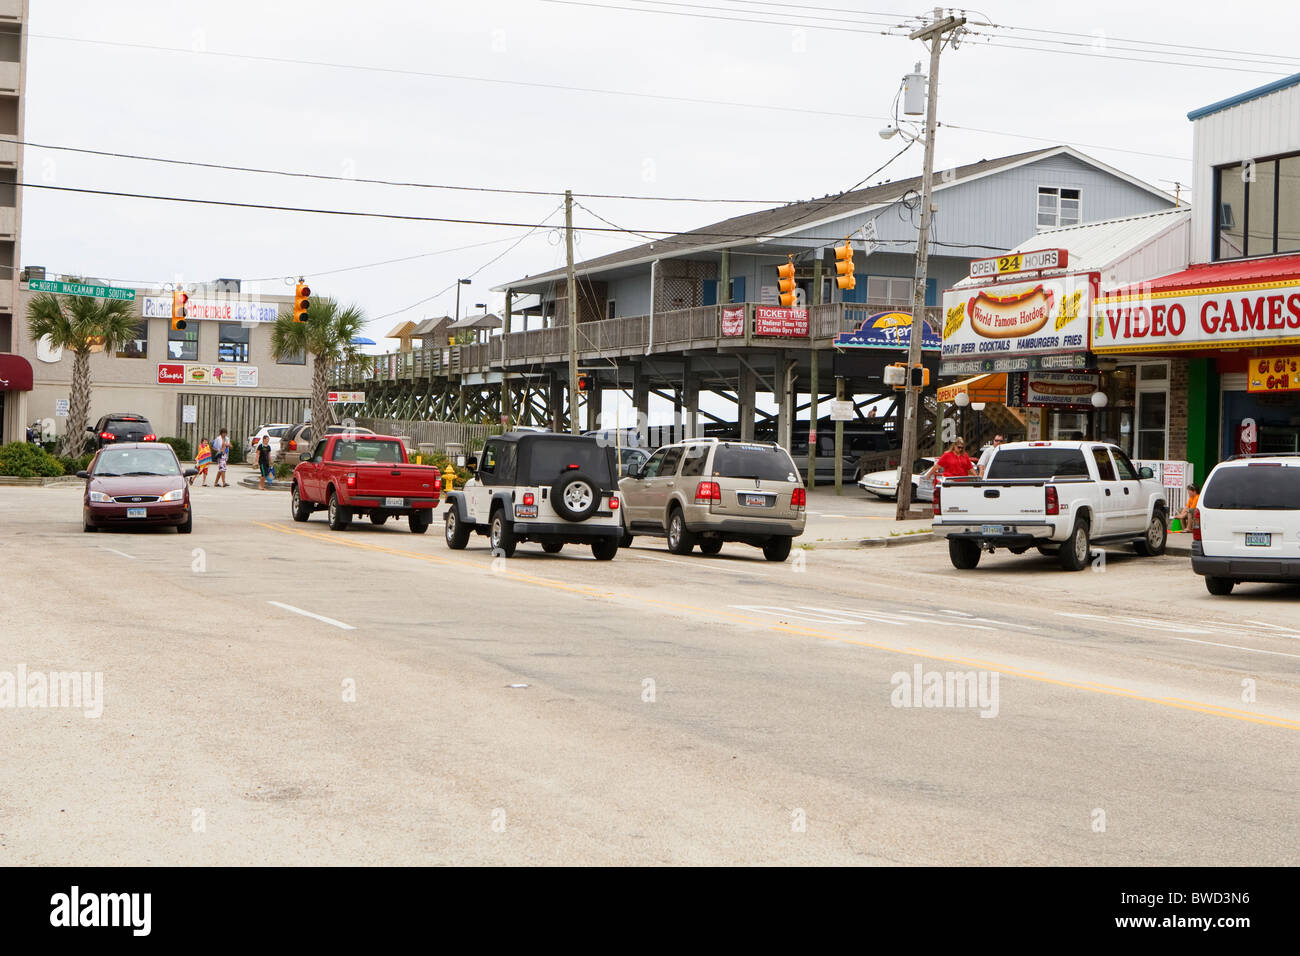 Shops & Restaurants along Atlantic Ave. & N. Waccamaw Dr. in the small town of Garden City, SC, to the south of Myrtle Beach, SC Stock Photo